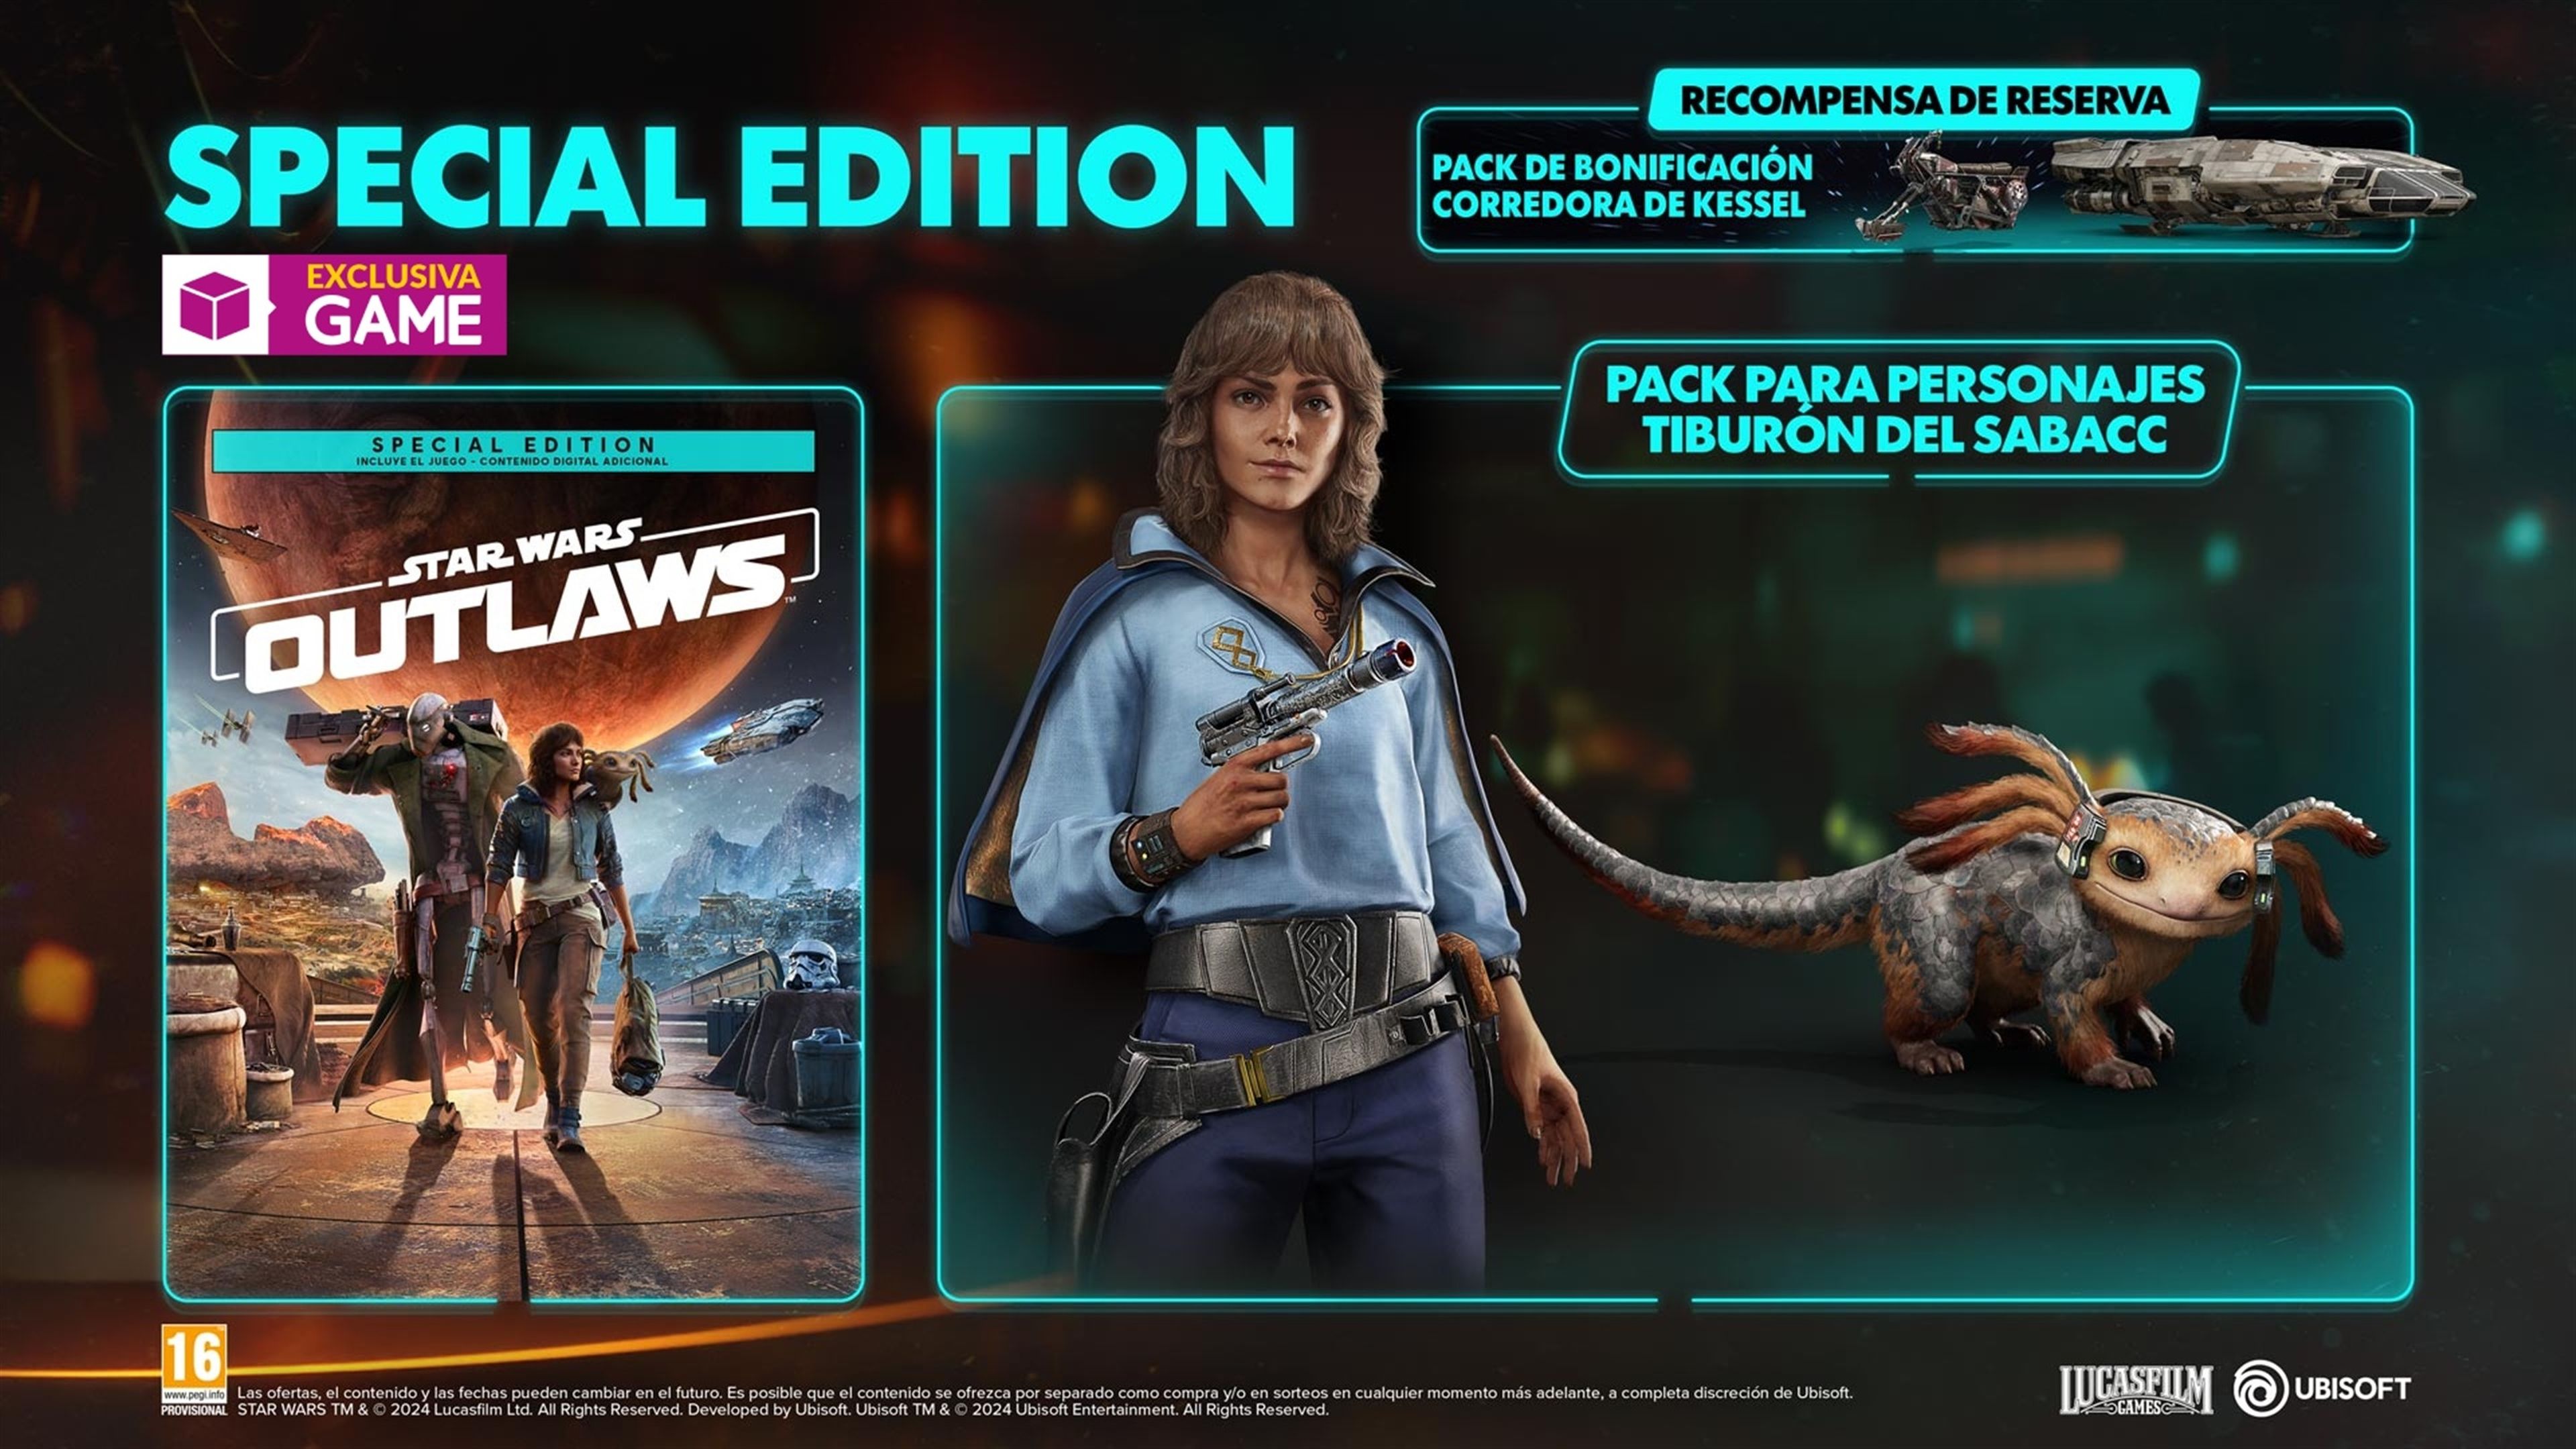 Star Wars Outlaws - Special Edition exclusiva GAME